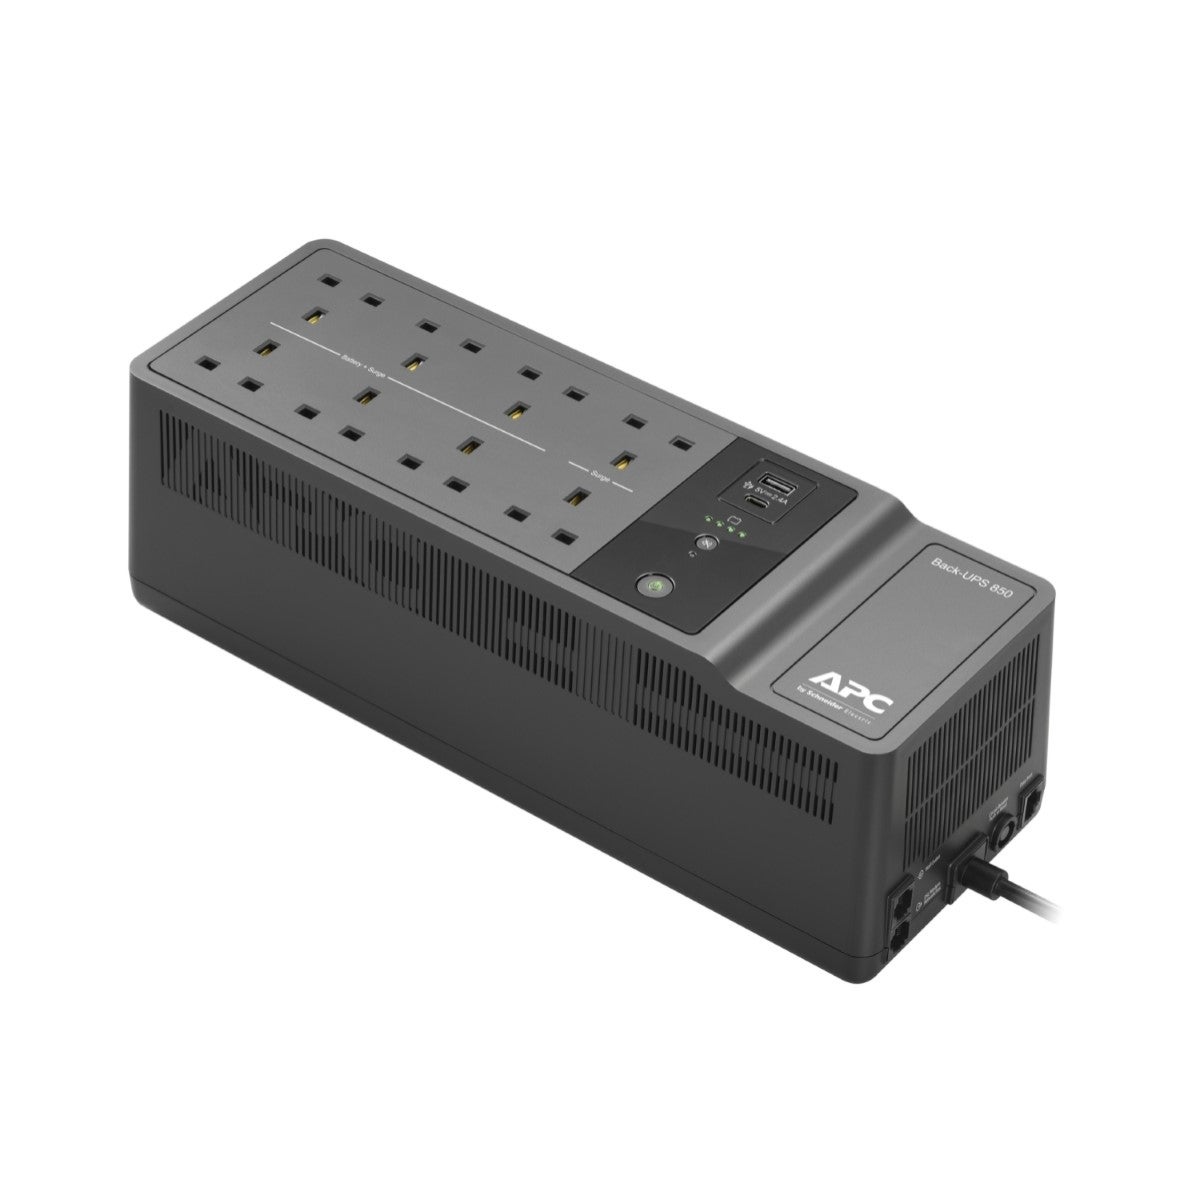 APC Back-UPS 850VA, 230V, USB Type-C and A charging ports, 8 BS 1363 outlets (2 surge)